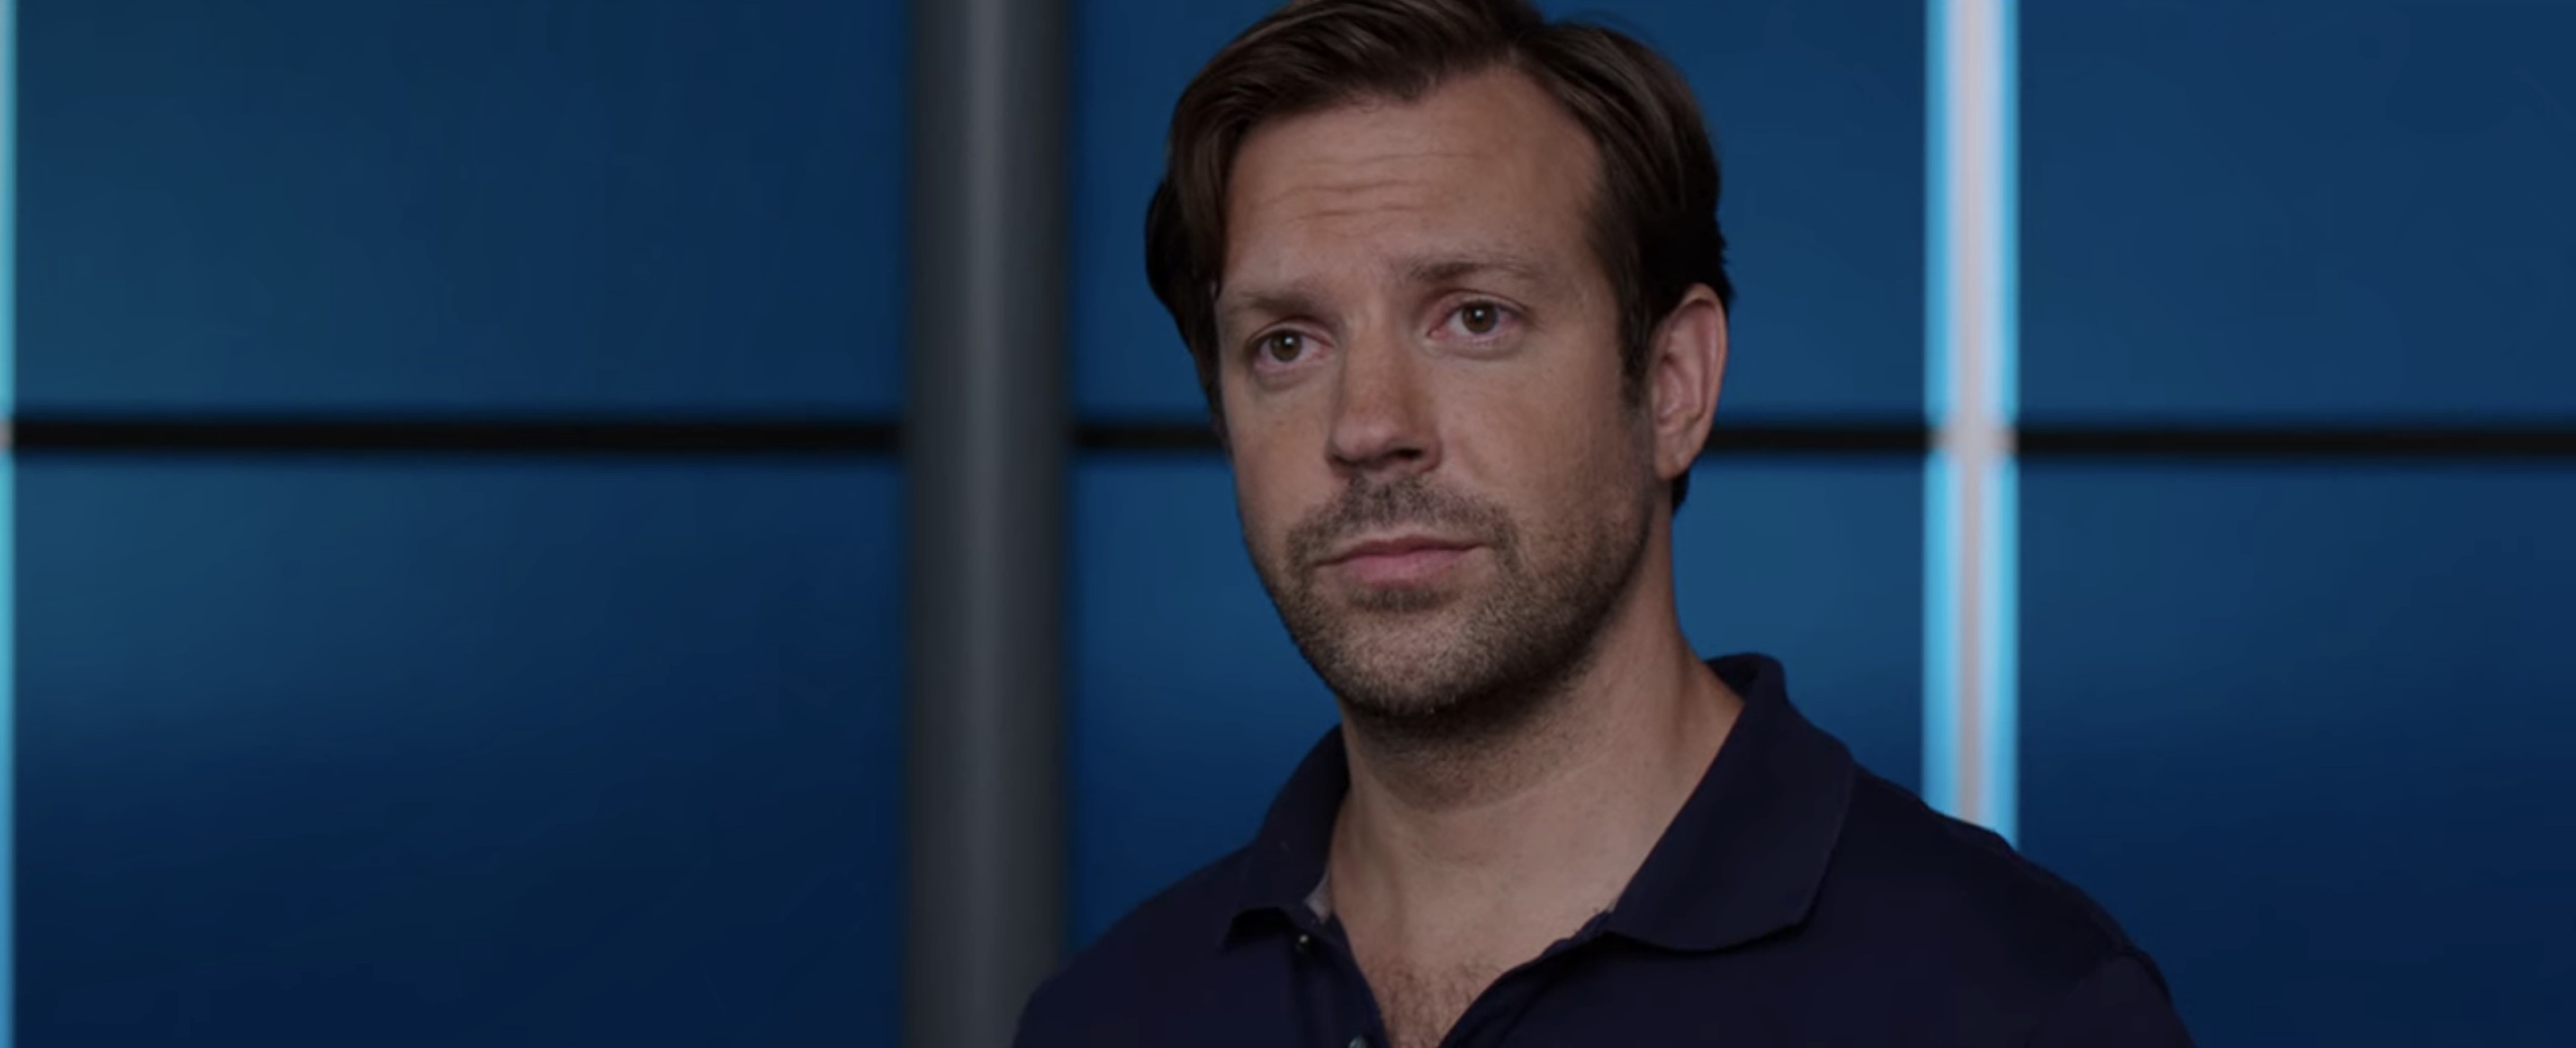 We're the Millers Cast on Netflix - Jason Sudeikis as David Clark